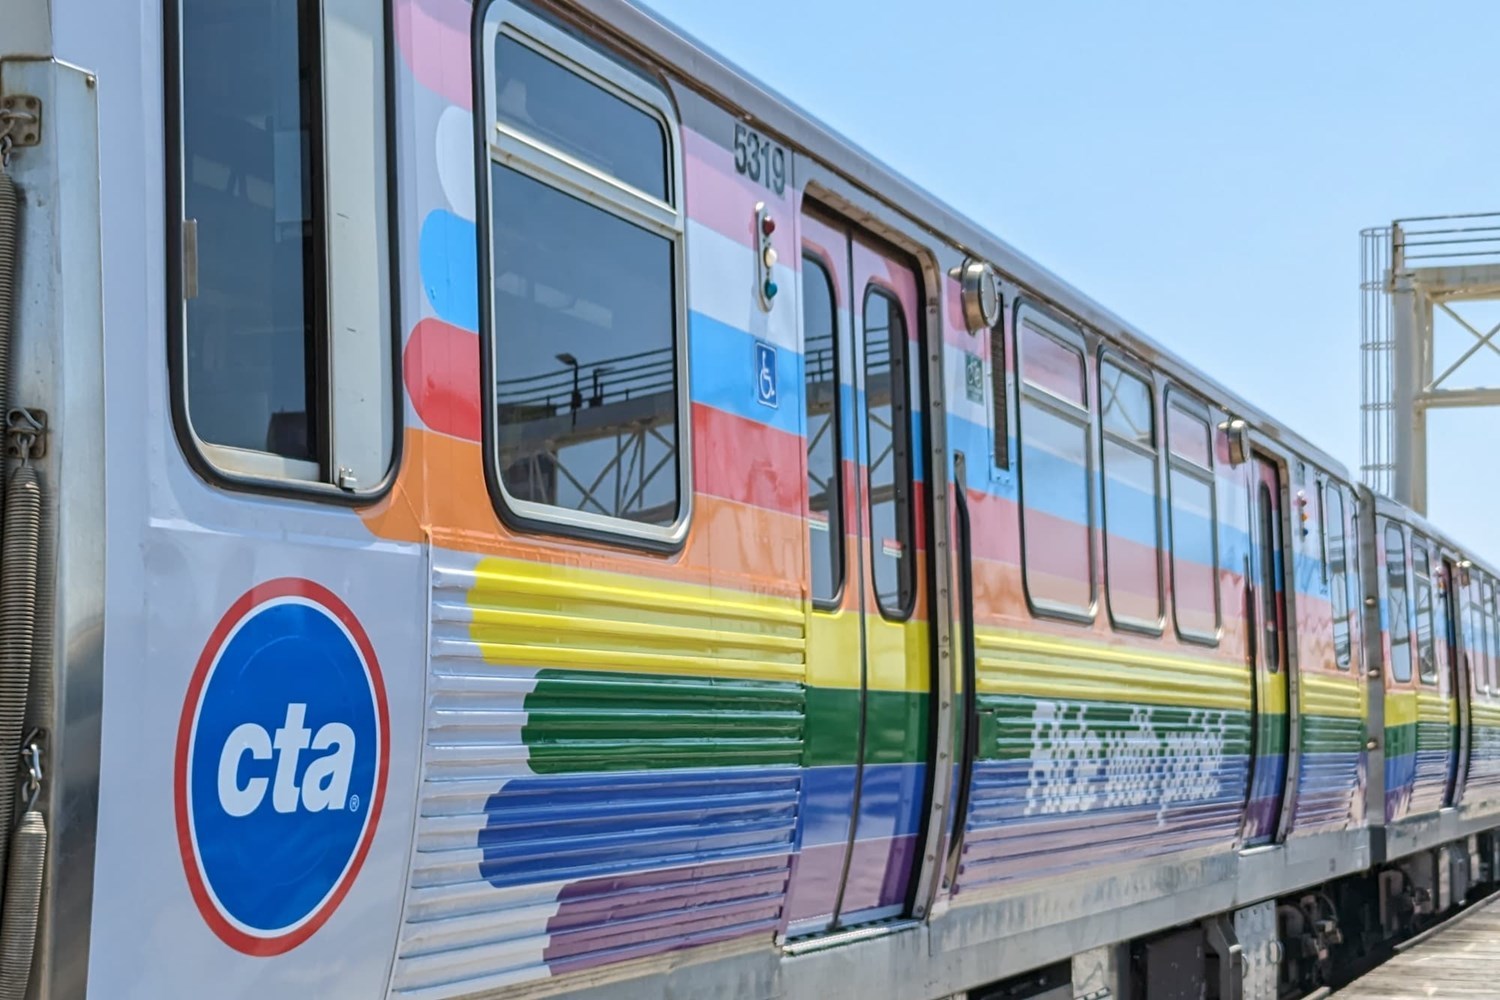 Detail shot of colorful stripes the on pride train